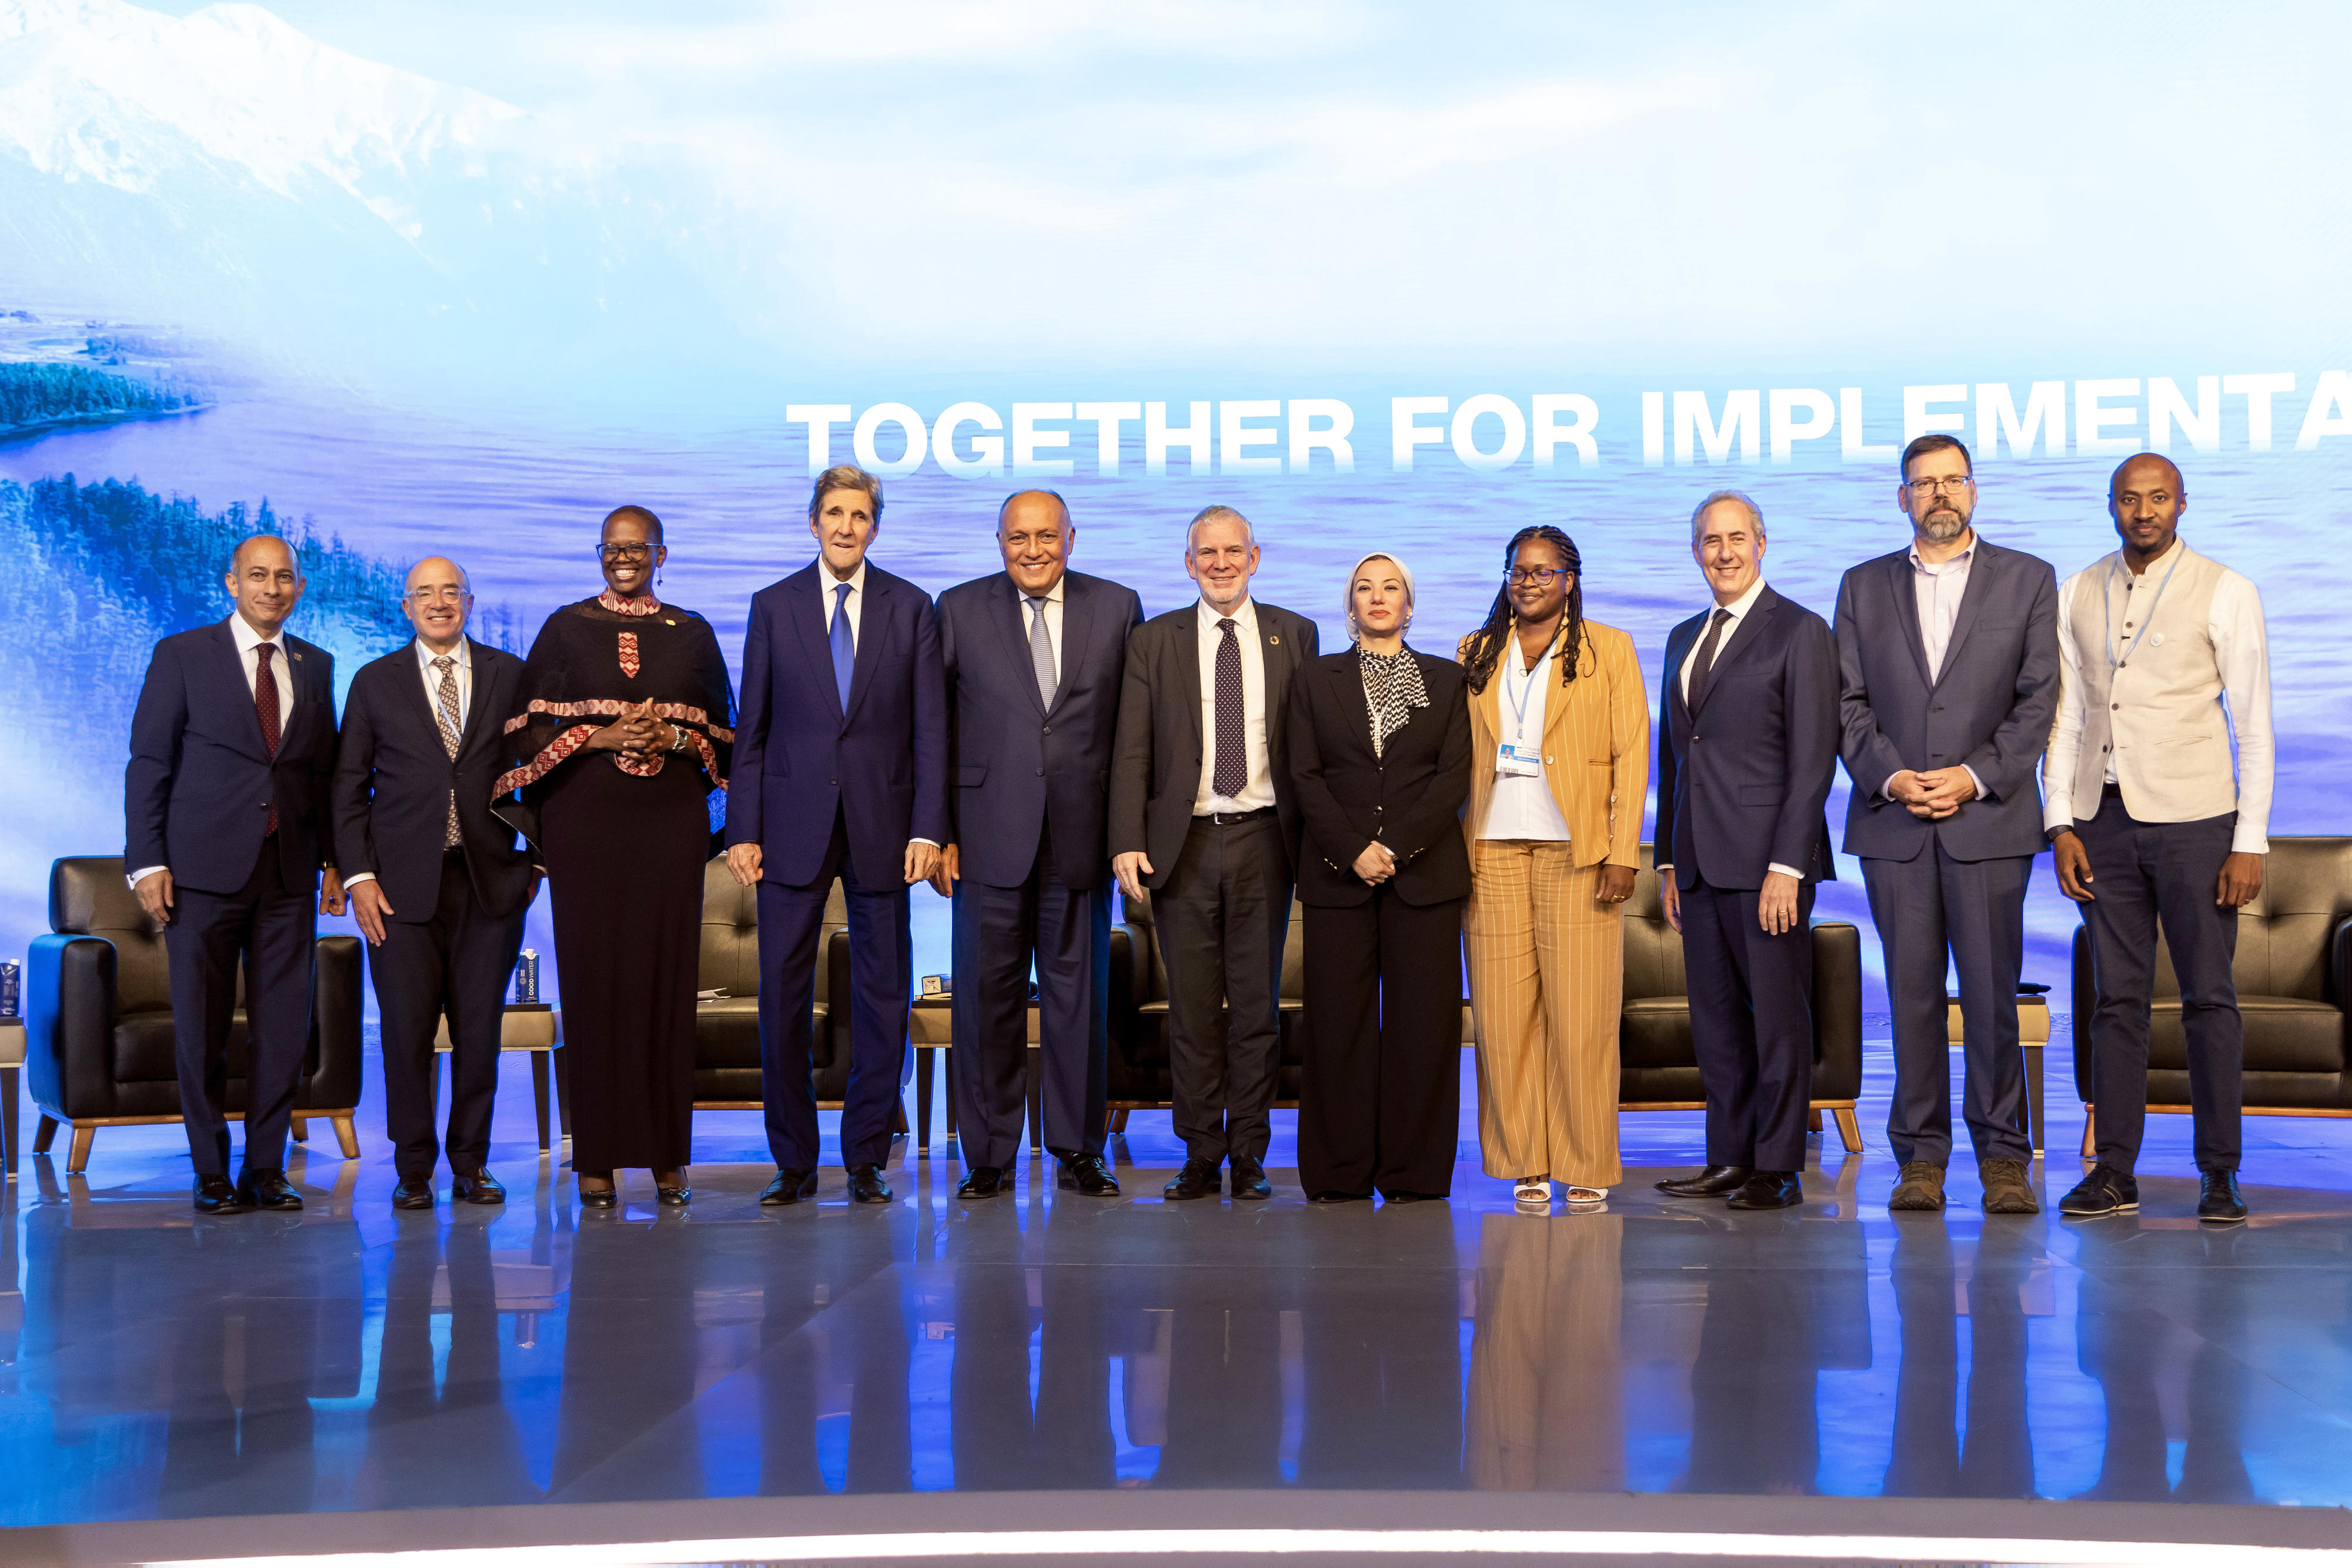 Group photo on the occasion of the announcement of close climate cooperation between Germany, the USA and Egypt in the framework of the so-called Mitigation Panel at the World Climate Conference COP27